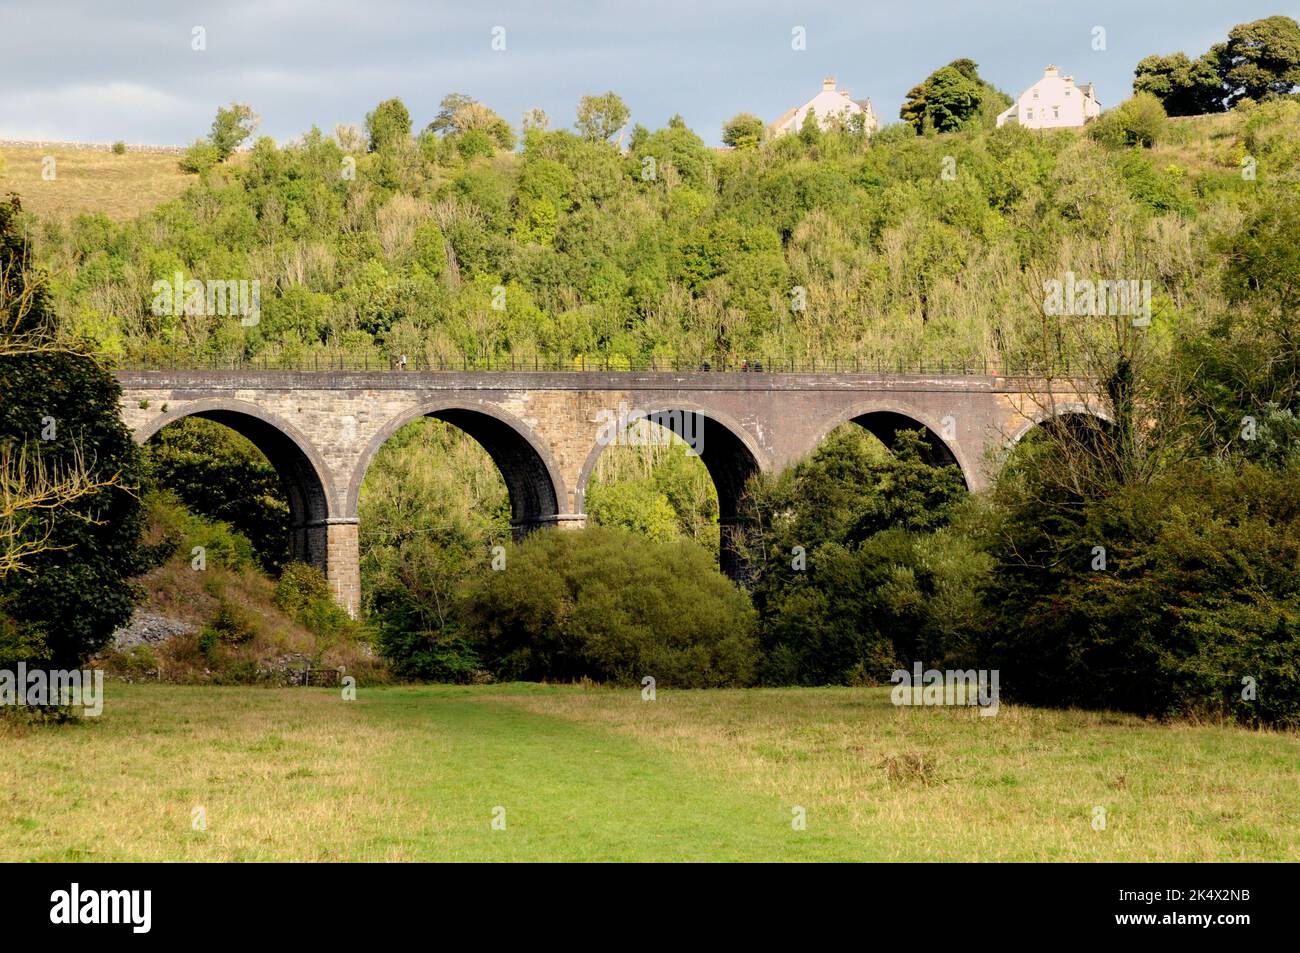 The Headstone Viaduct near Monsal Head. The viaduct is now a multi-use trail, its five arches spanning the River Wye. It is grade 2 listed structure. Stock Photo